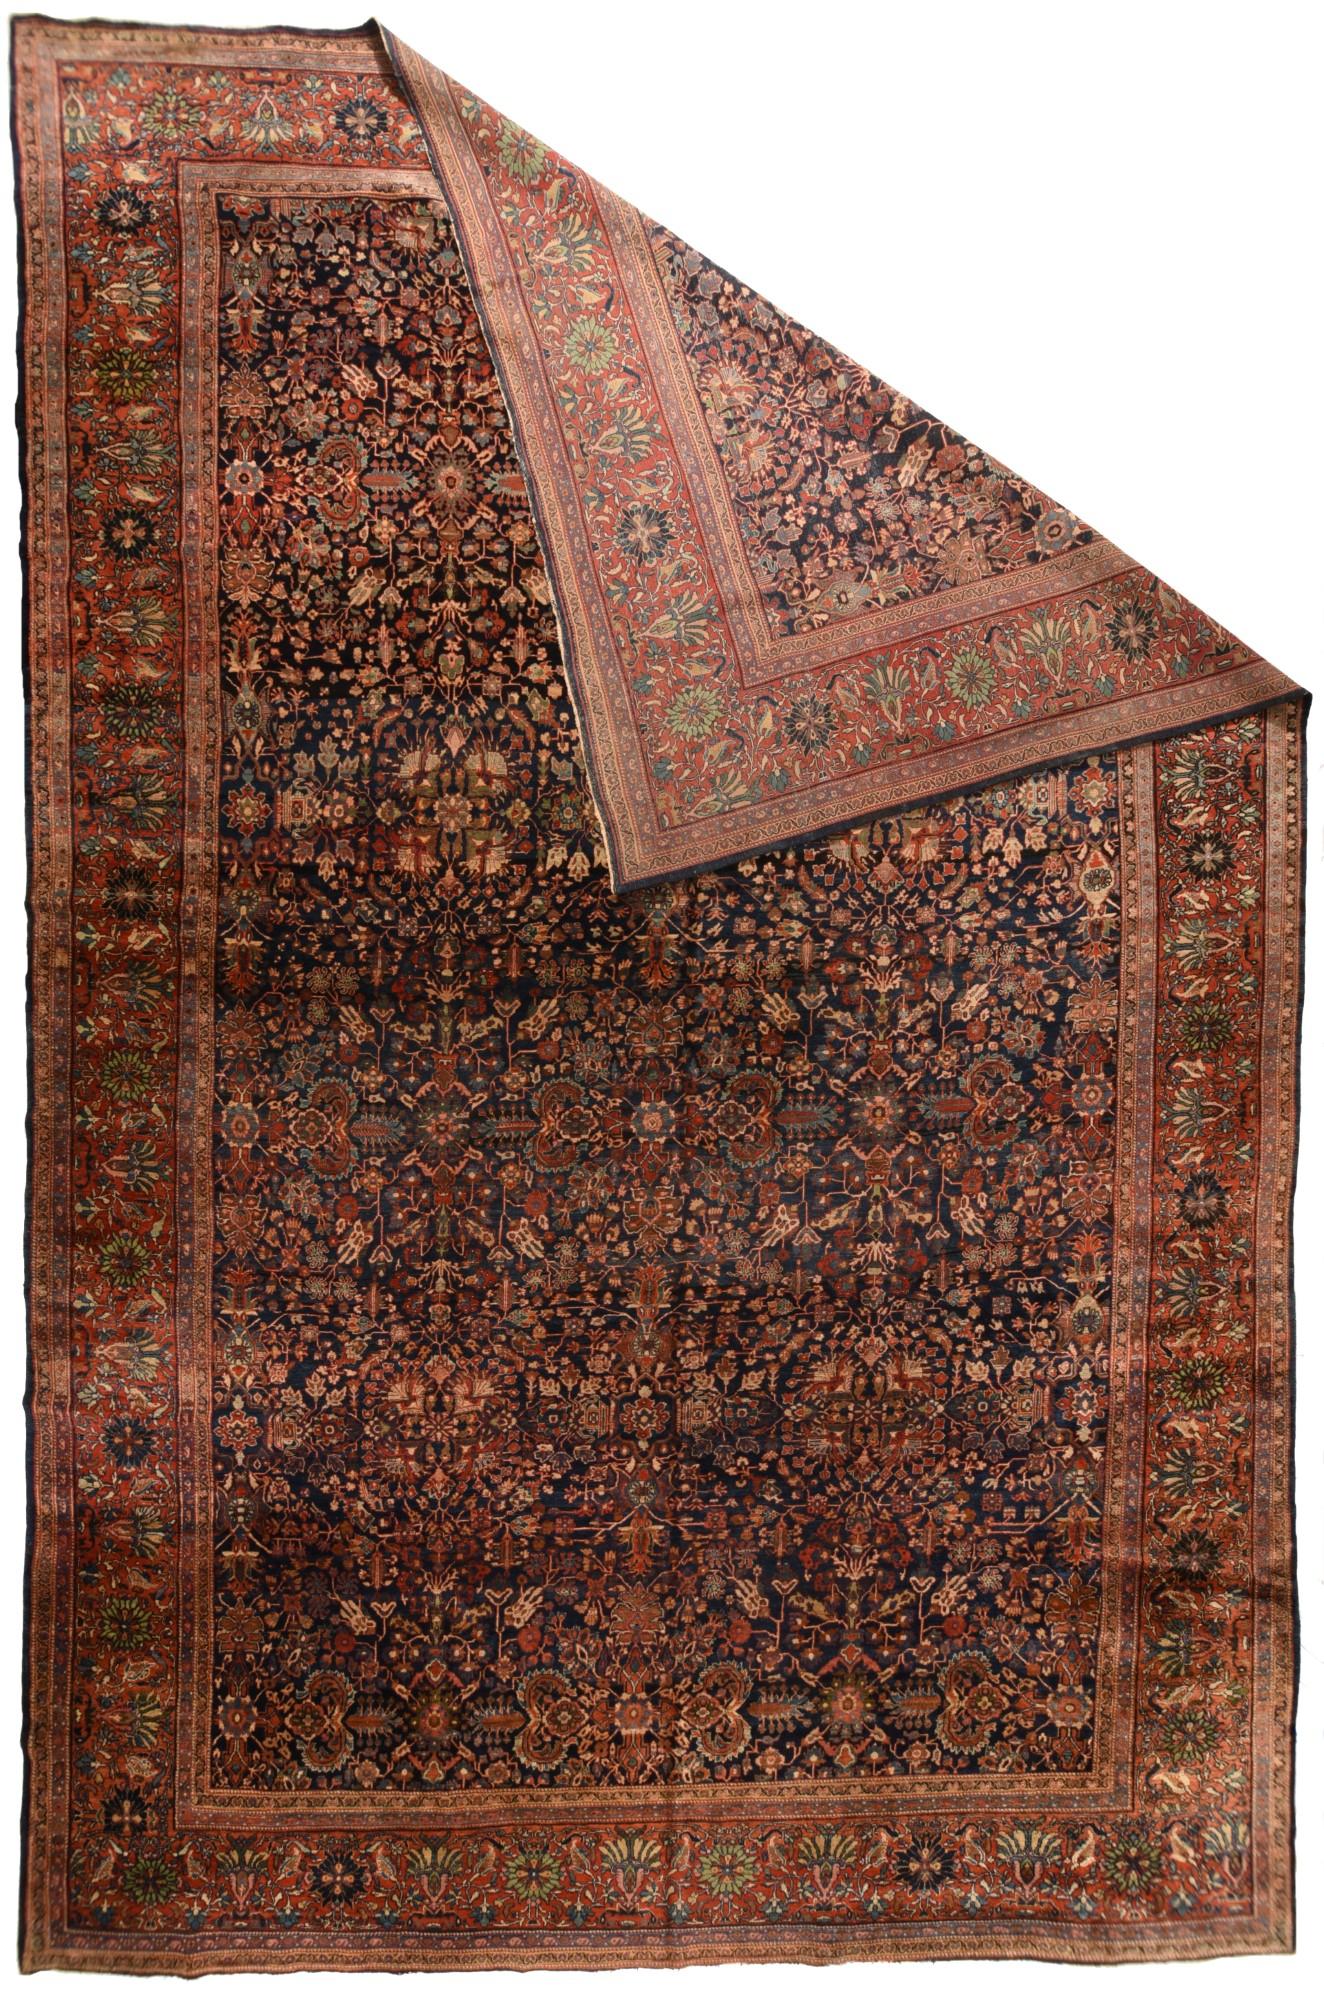 This well-woven, cotton foundation Central Persian city carpet presents a deep navy indigo field with a dense cover of rosettes, palmettes, flowering stems, angular branches and sharply curved barbed bitonal leaves. Saturated red border with